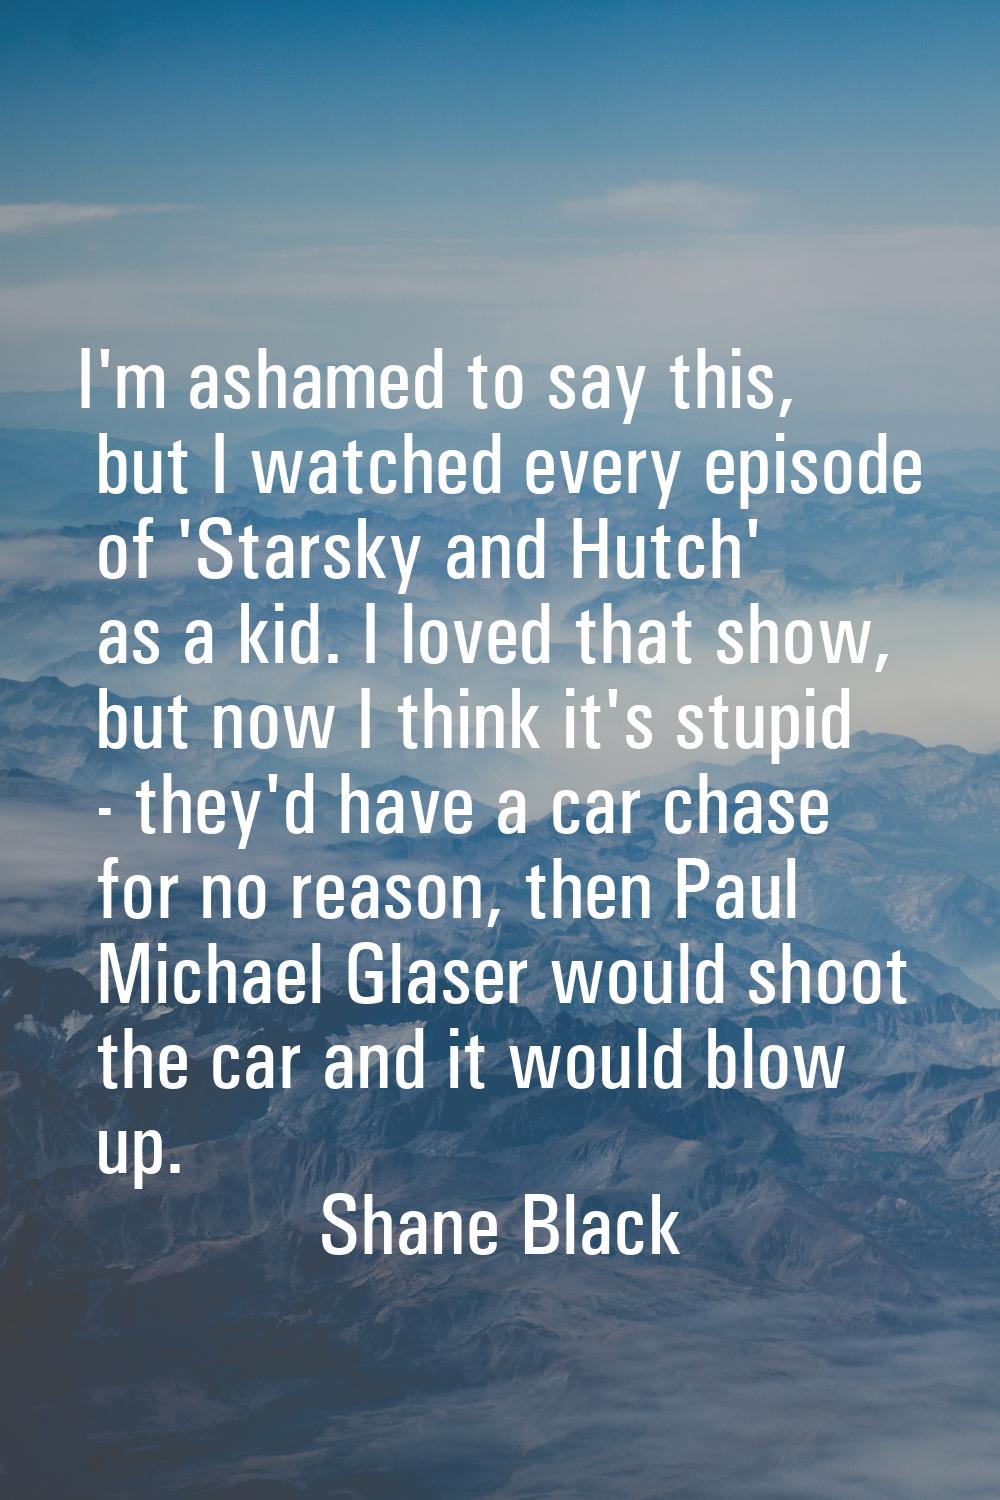 I'm ashamed to say this, but I watched every episode of 'Starsky and Hutch' as a kid. I loved that 